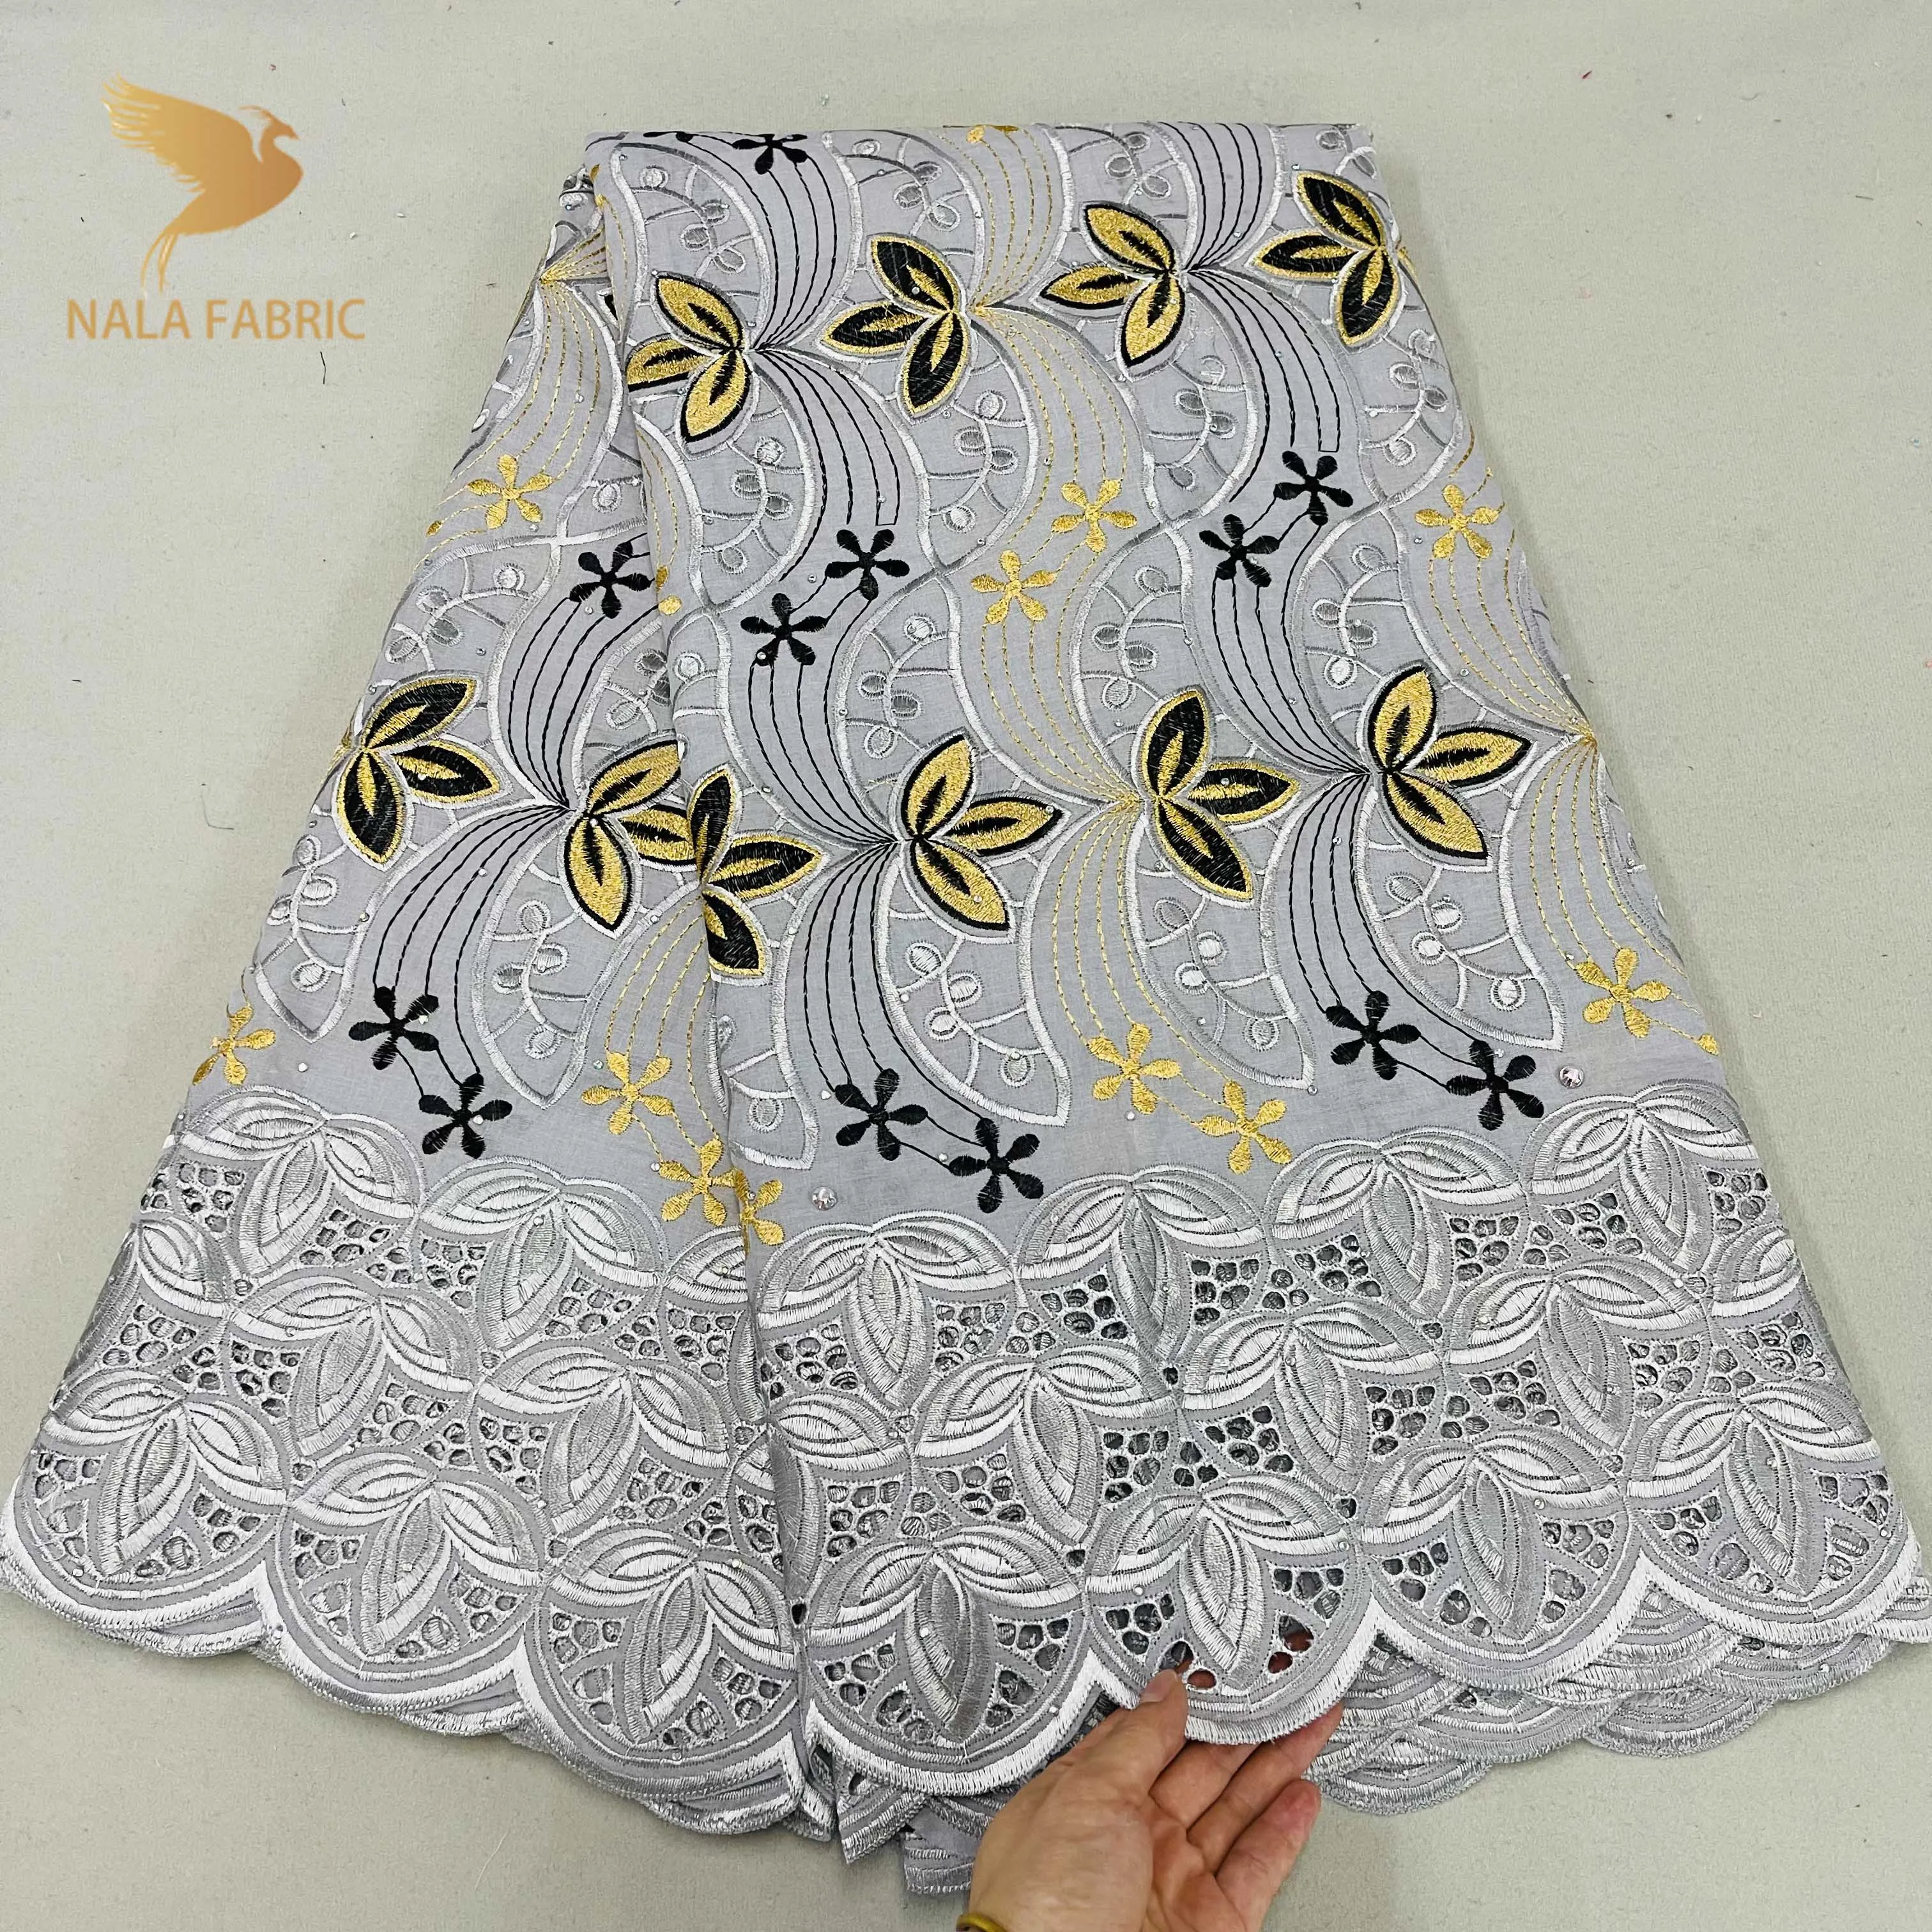 

Nala High Quality African Lace Fabric Nigerian Cotton Lace Fabric Embroidery Swiss Voile In Switzerland For Diy Dress HC202285